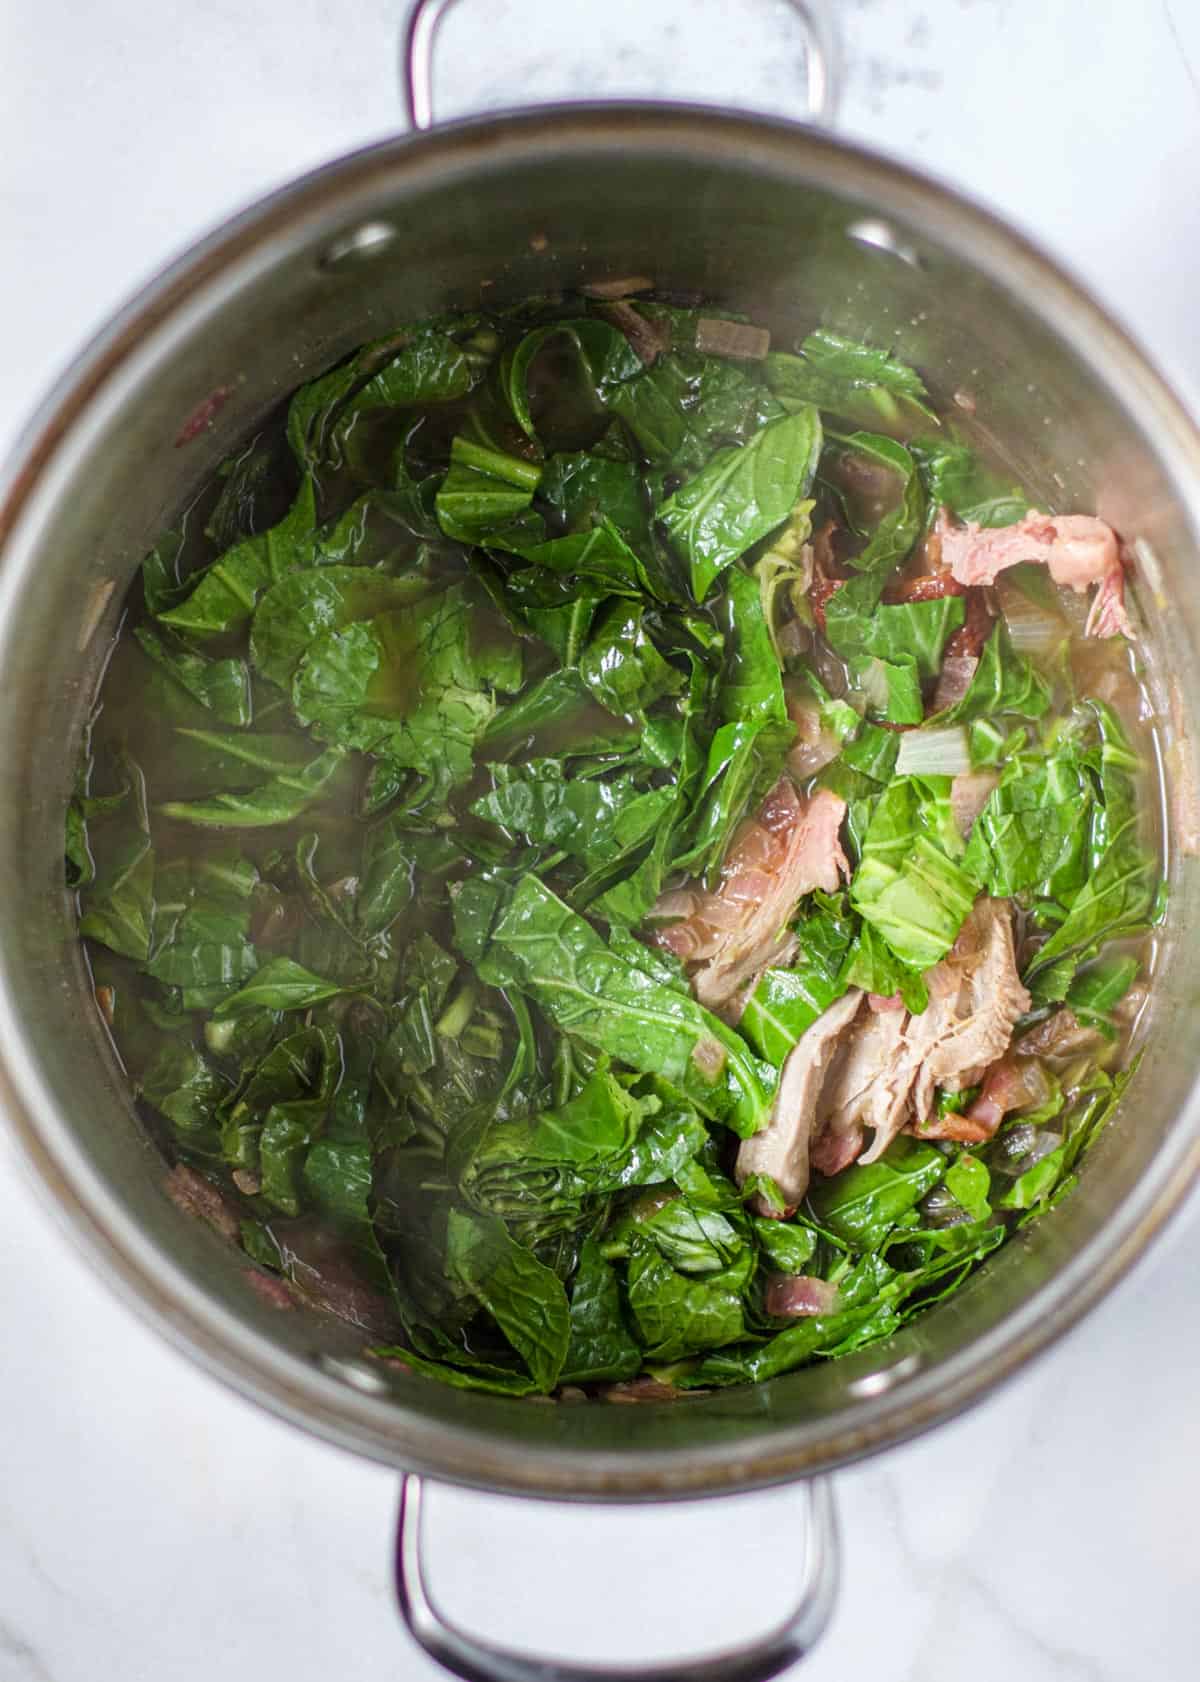 A pot of cooked collard greens with smoked turkey legs